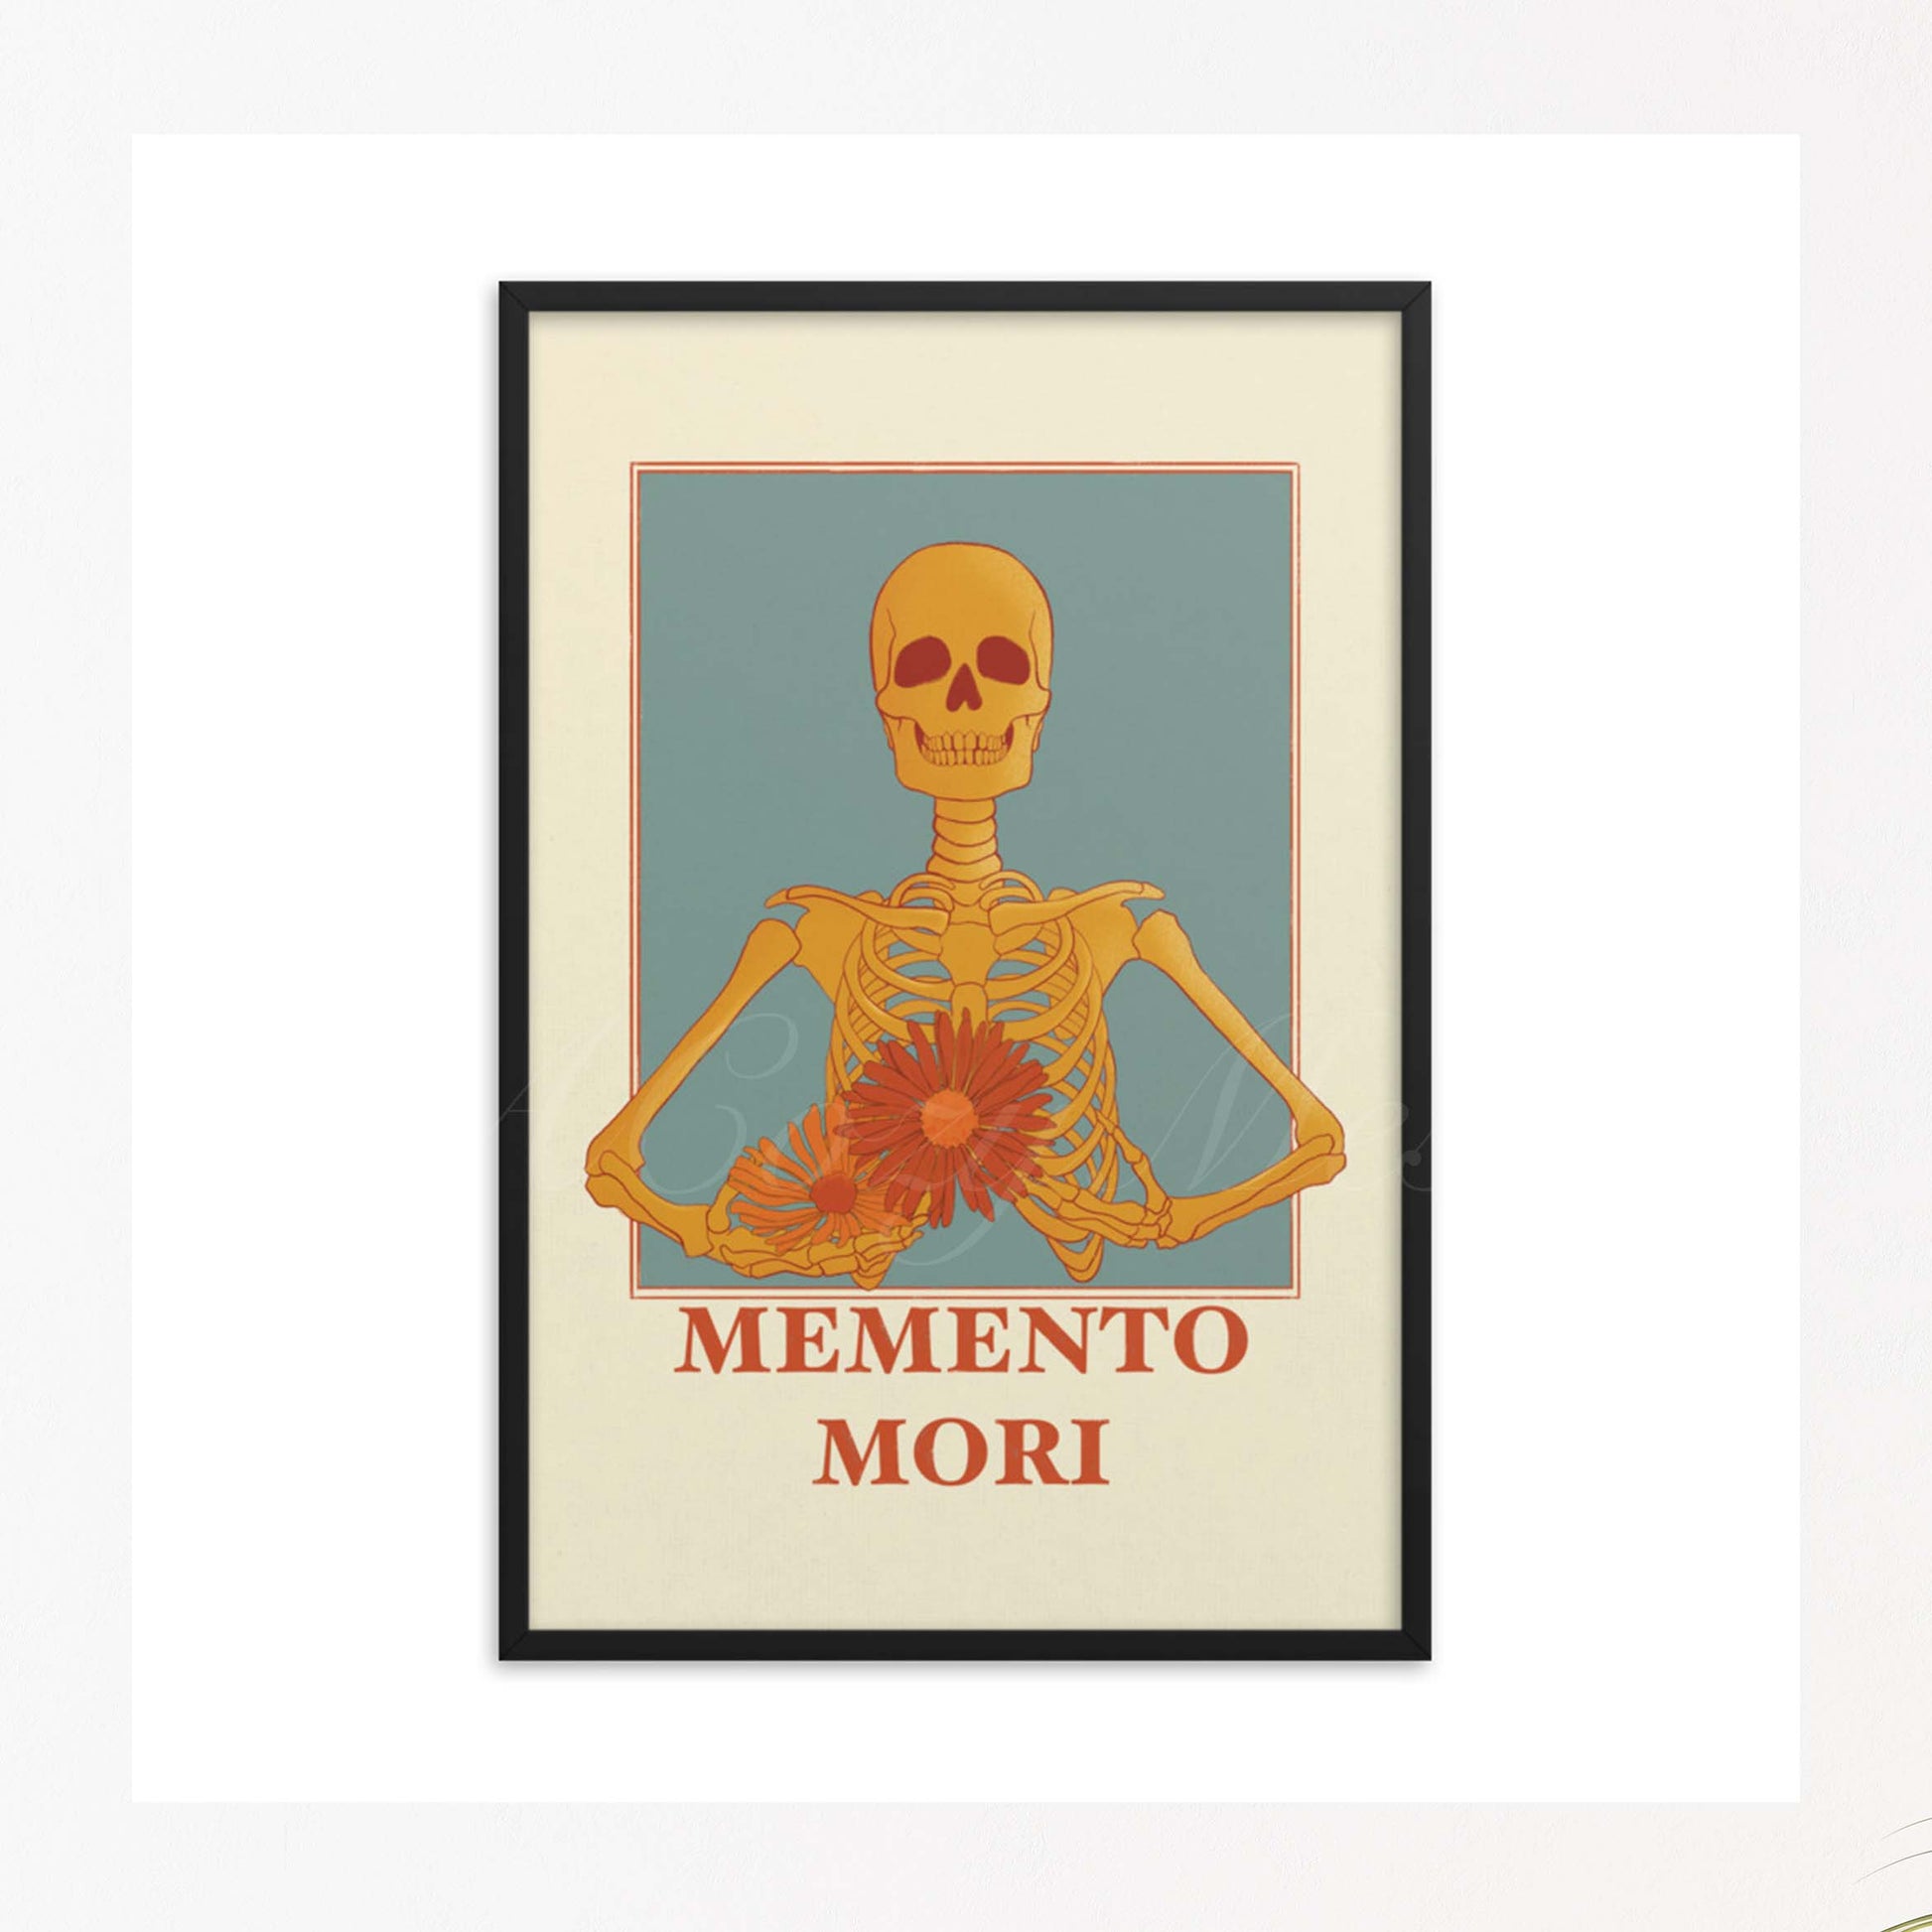 A memento mori art piece in beige blue, yellow & orange hues, featuring a skeleton carrying colorful flowers in black frame